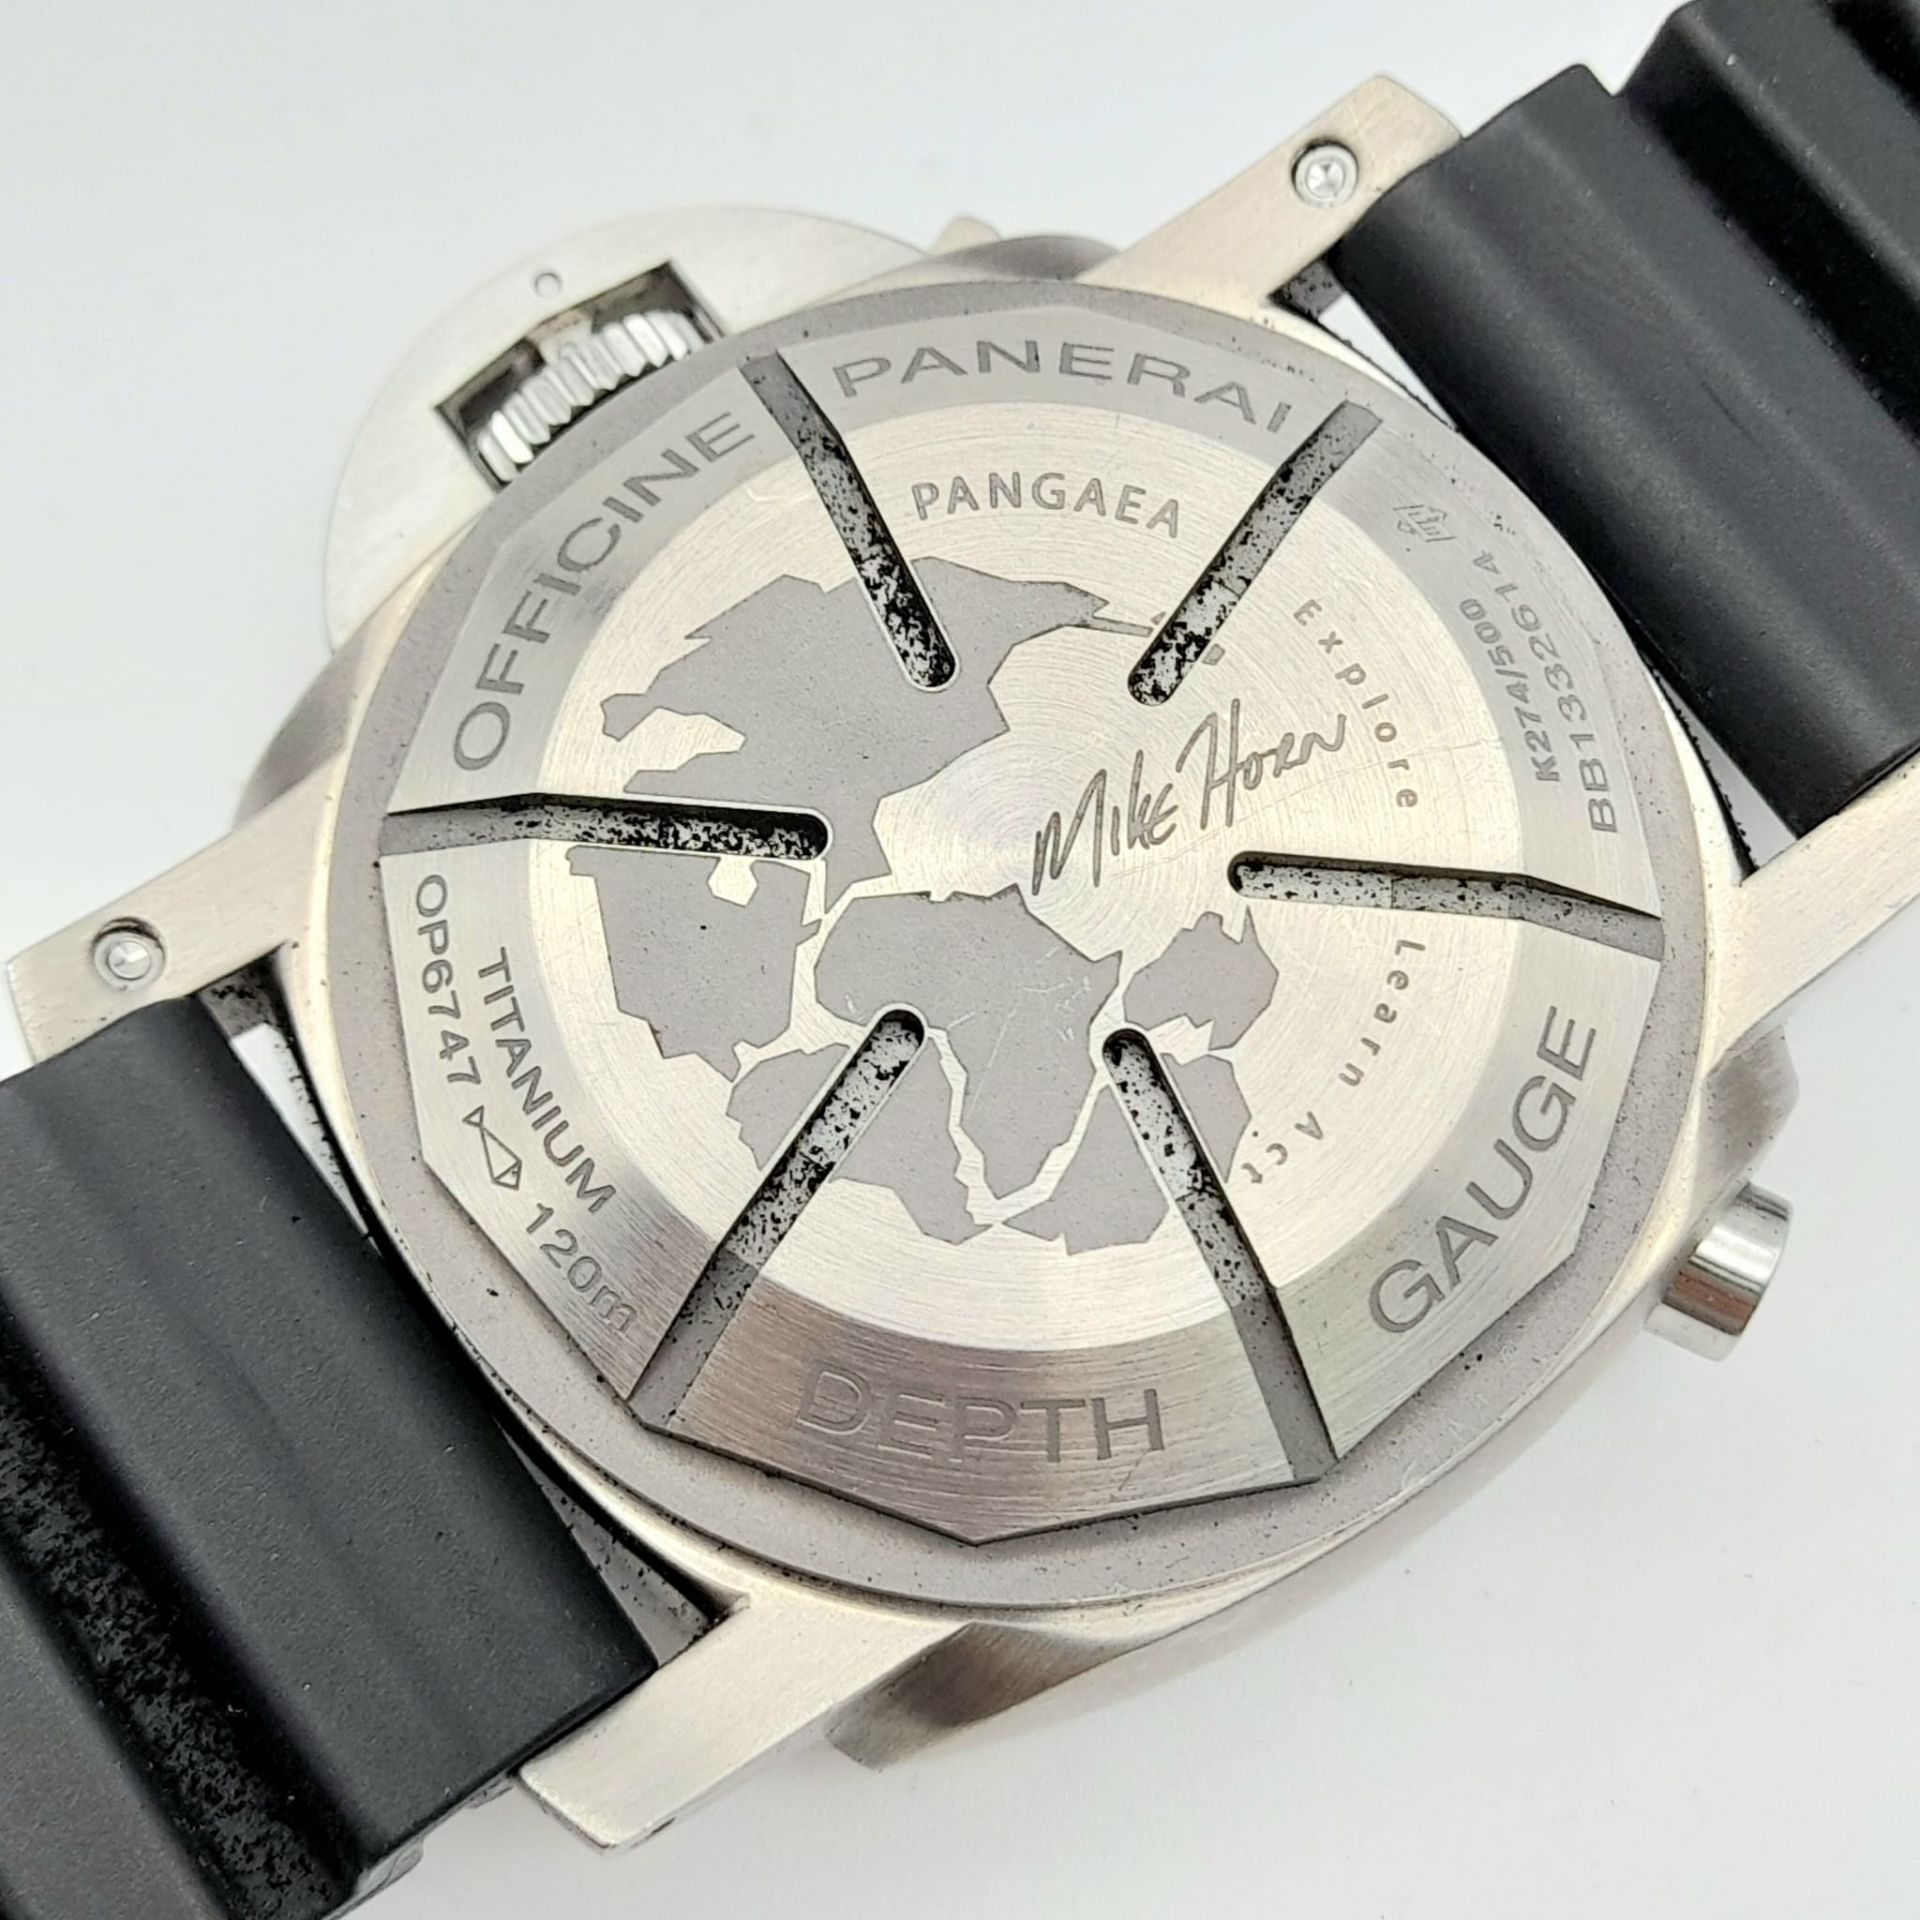 An Incredible Limited Edition Panerai Luminor 1950 Depth Gauge Automatic Gents Watch. A special - Image 10 of 21